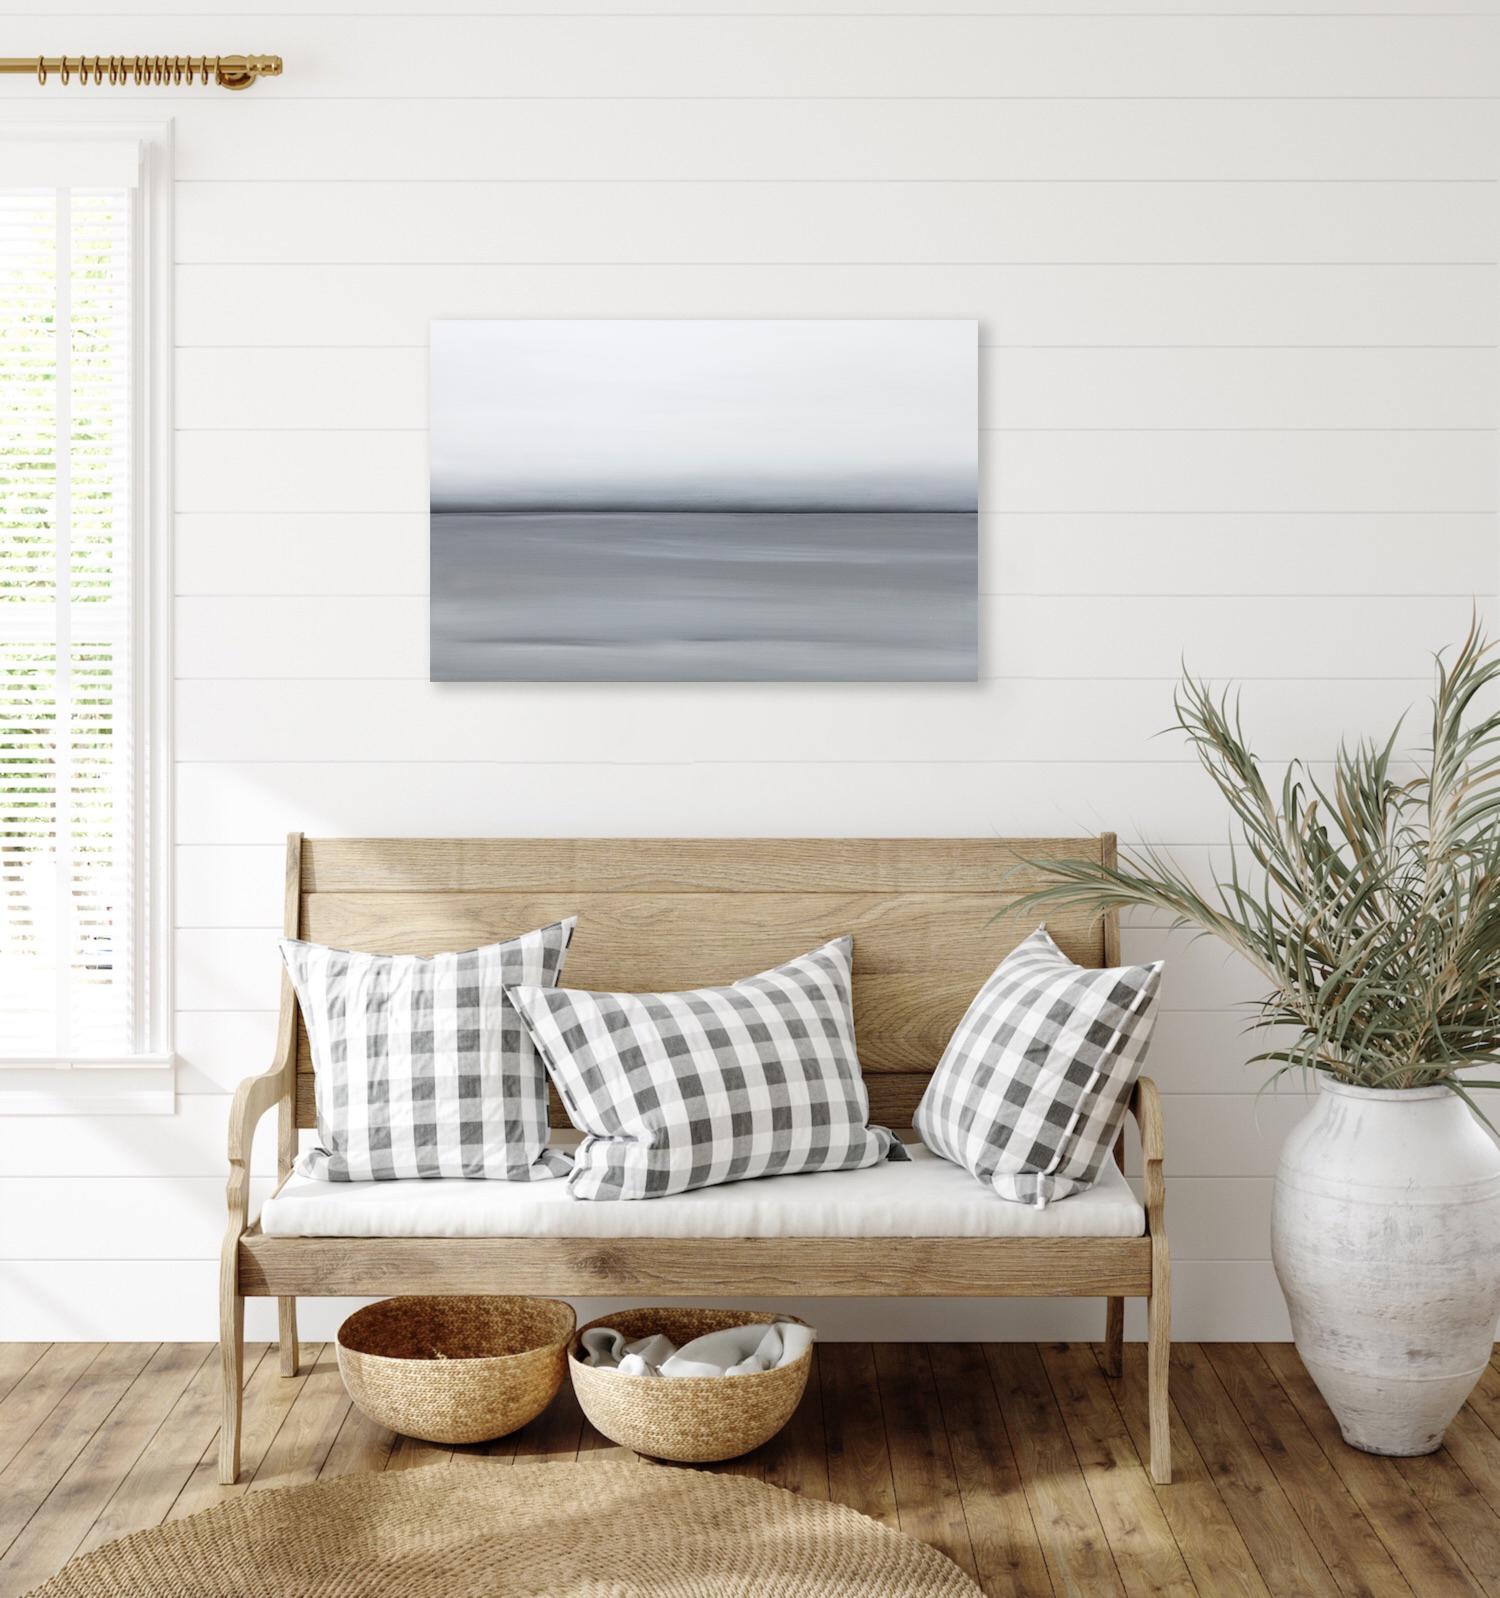 This abstract oil painting by Tony Iadicicco features a monochromatic palette with varying grey tones. The painting has a dark, stark horizon line and blended greys above and below it, evoking the feeling of a serene land or seascape. The painting